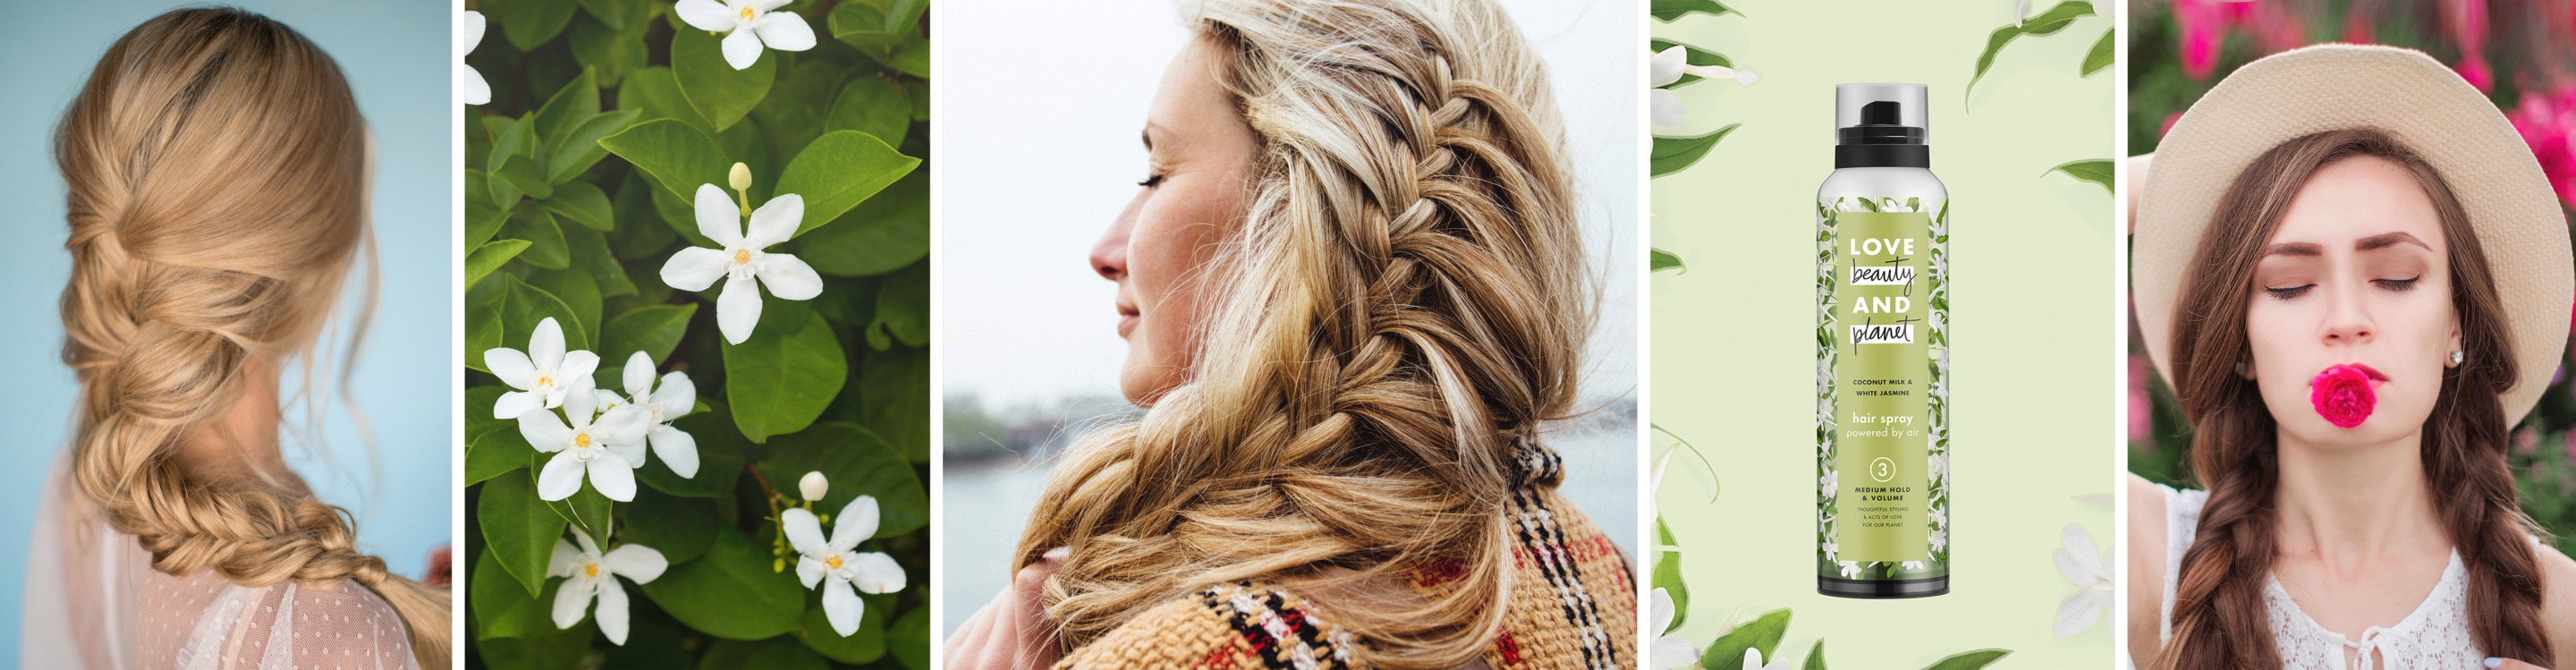 French braid Tutorial: Header Image of a Woman with a French Braid and Love Beauty and Planet Hair Spray